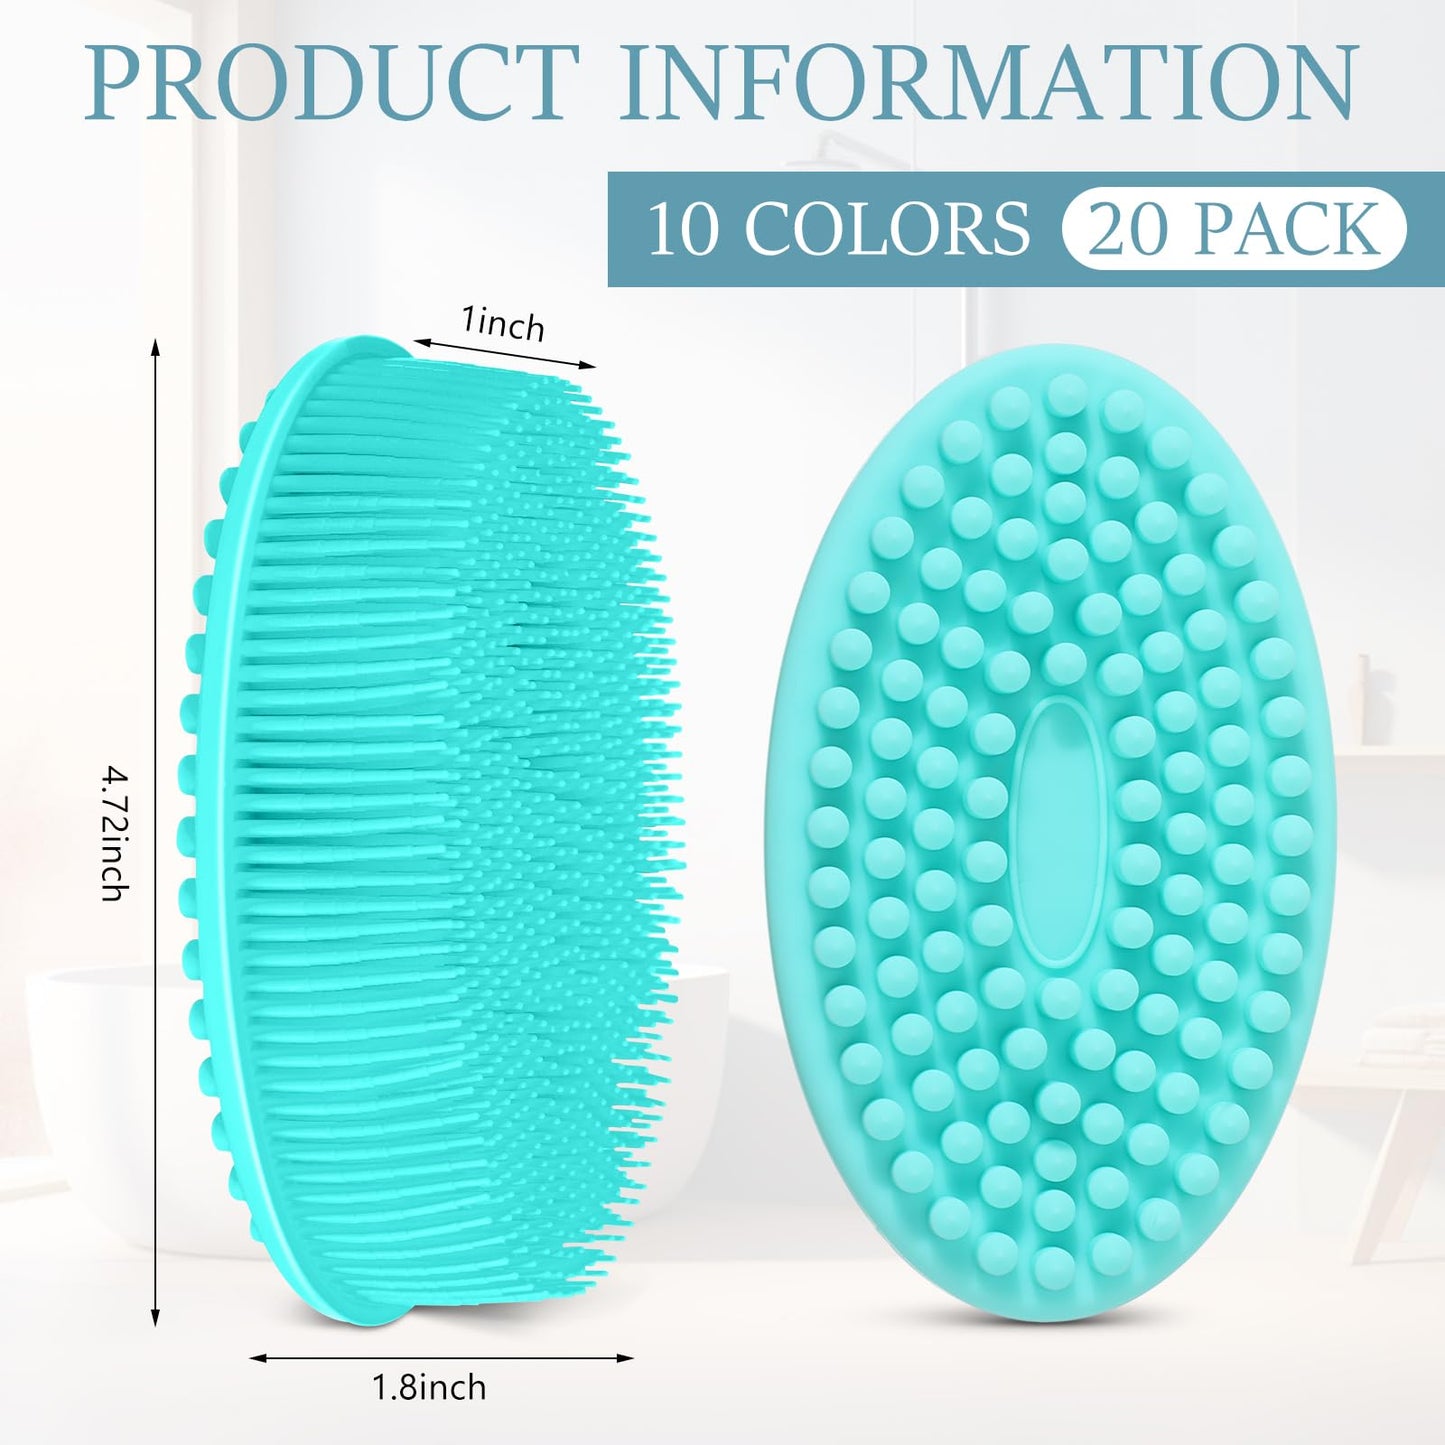 FoldTier 20 Pack Silicone Body Scrubber Soft Silicone Loofah Exfoliating Body Scrubber Double Sided Silicone Body Brush Shampoo Massager for Men Women Kid Skin Clean, 10 Colors